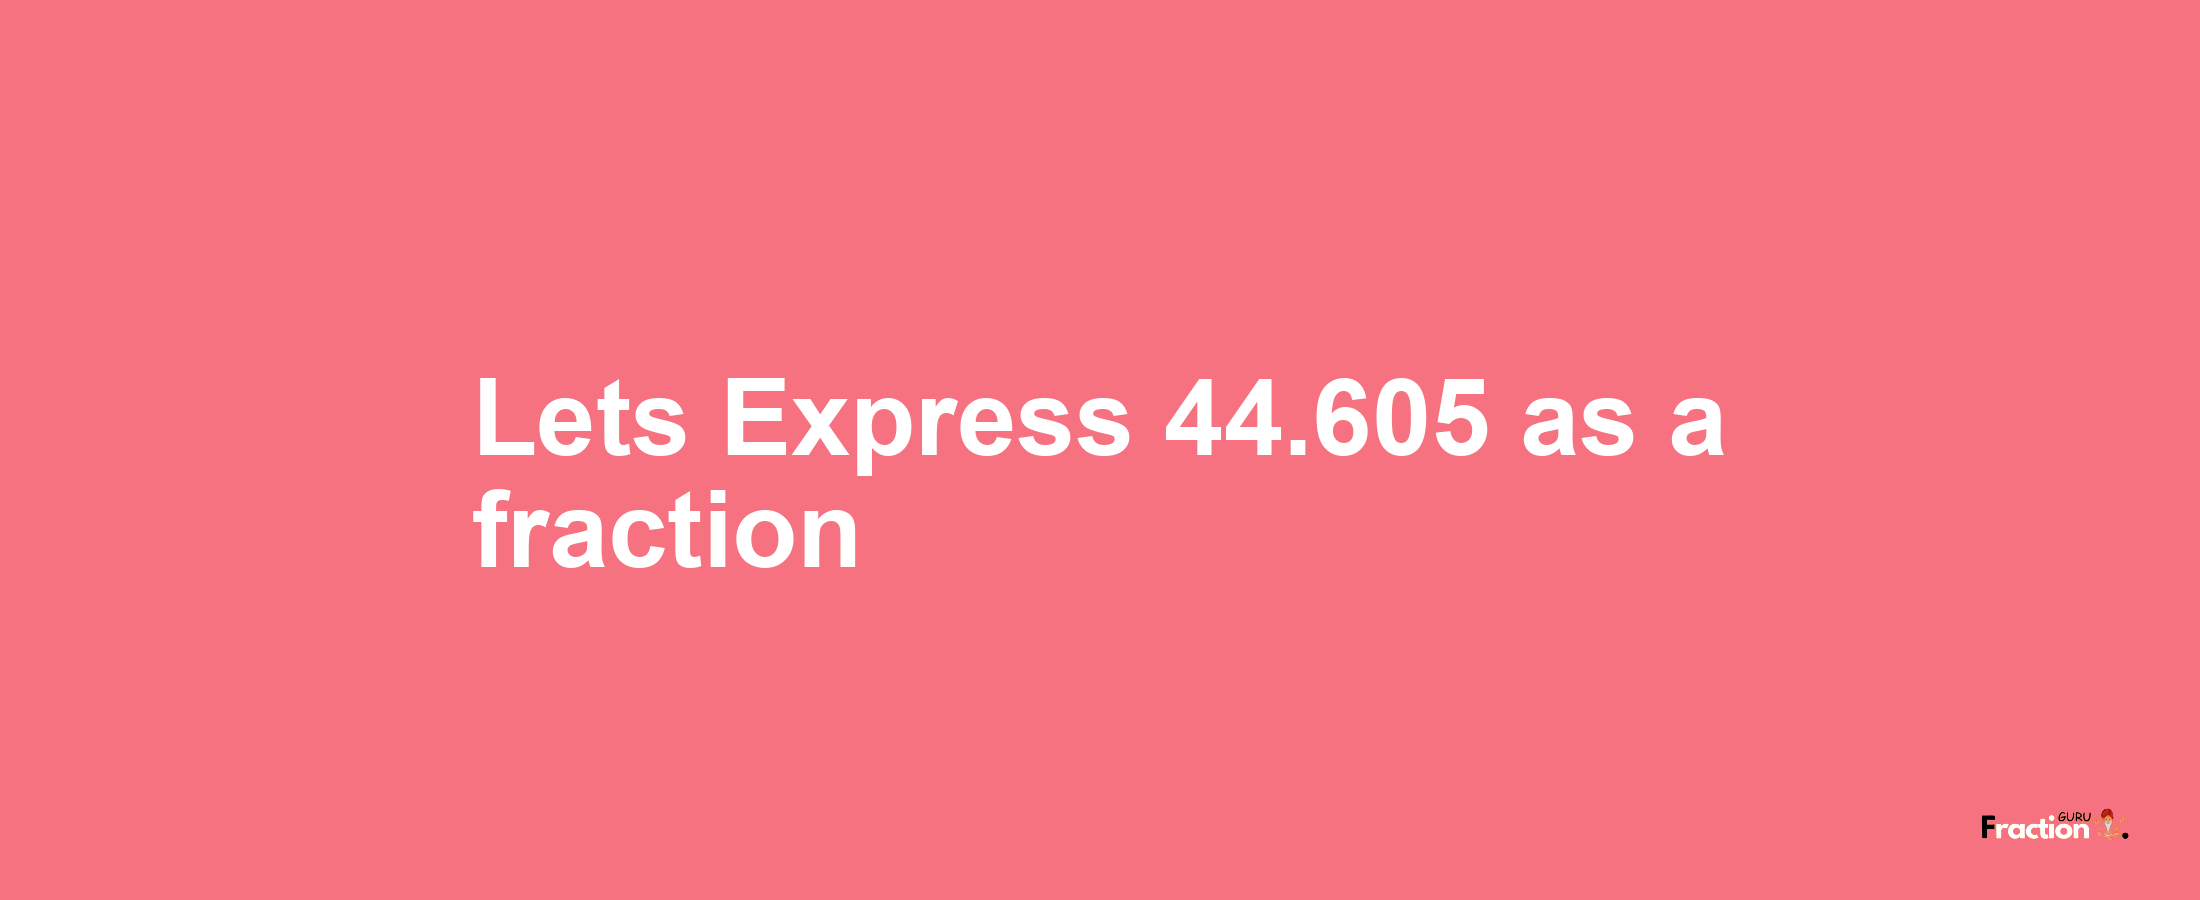 Lets Express 44.605 as afraction